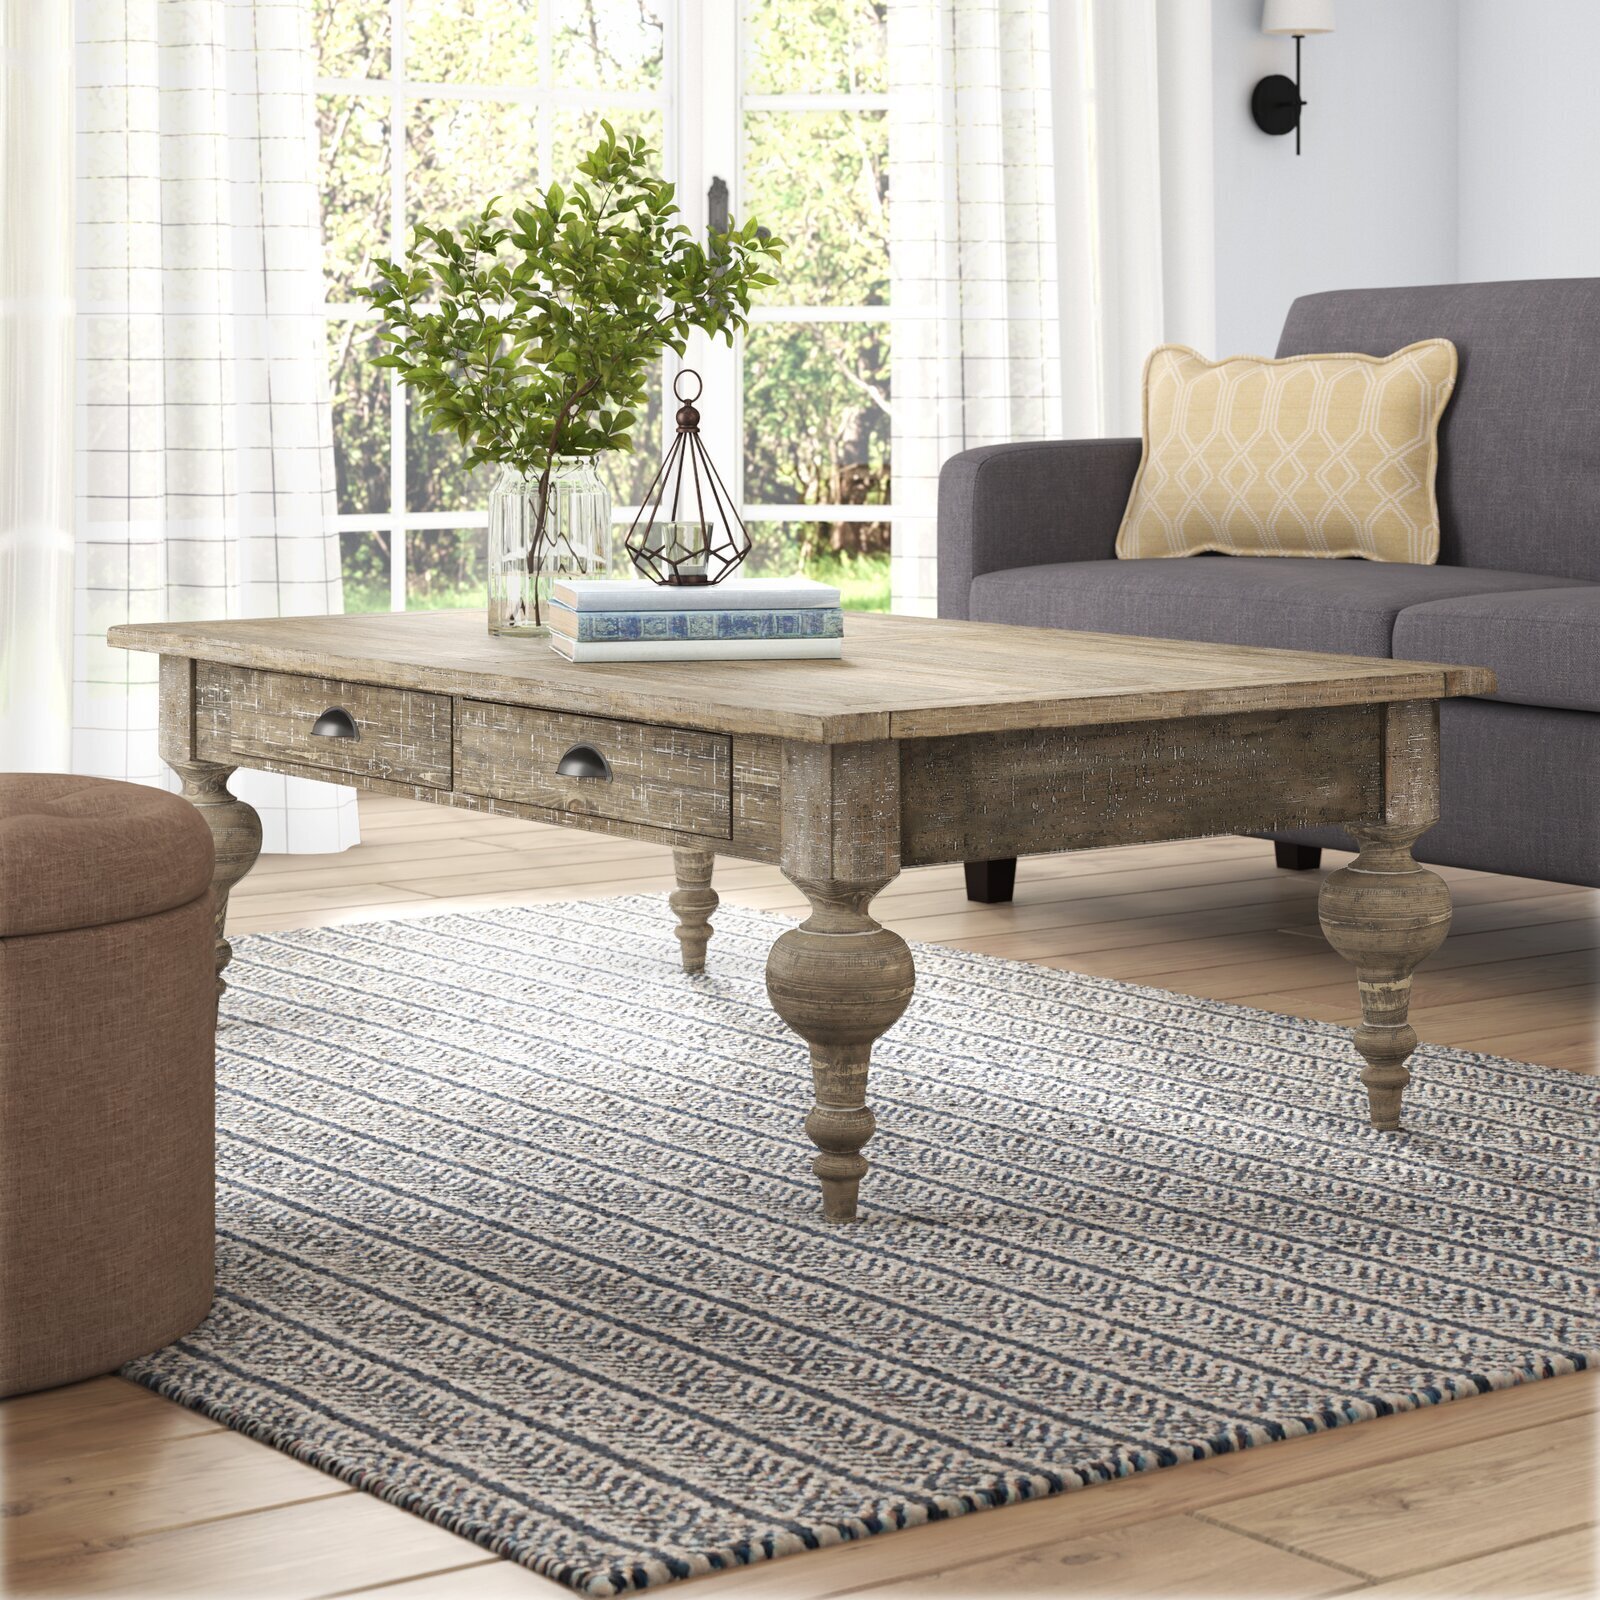 Sandstone Gray French Country Coffee Table